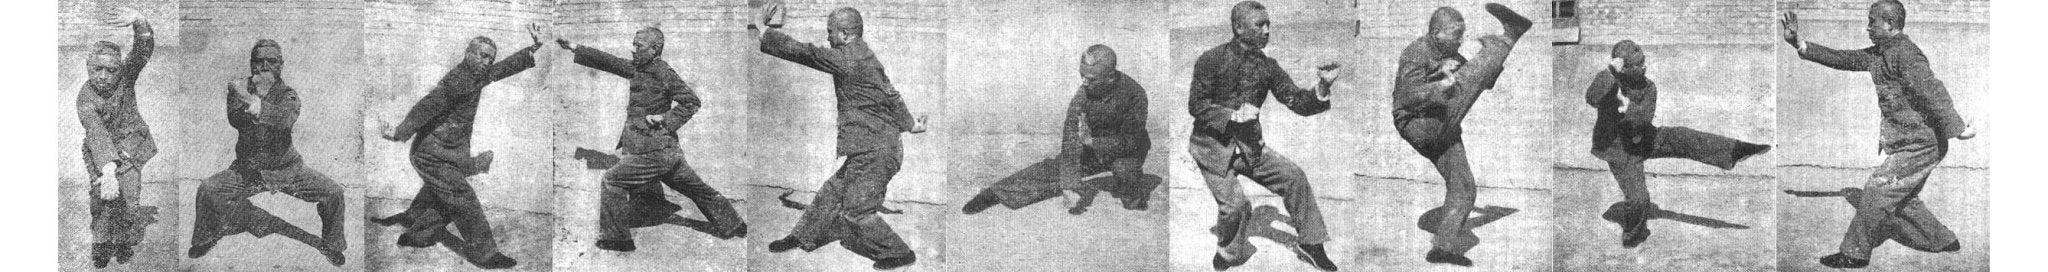 Chuan Na Quan. Style of Piercing Blows and Holds.